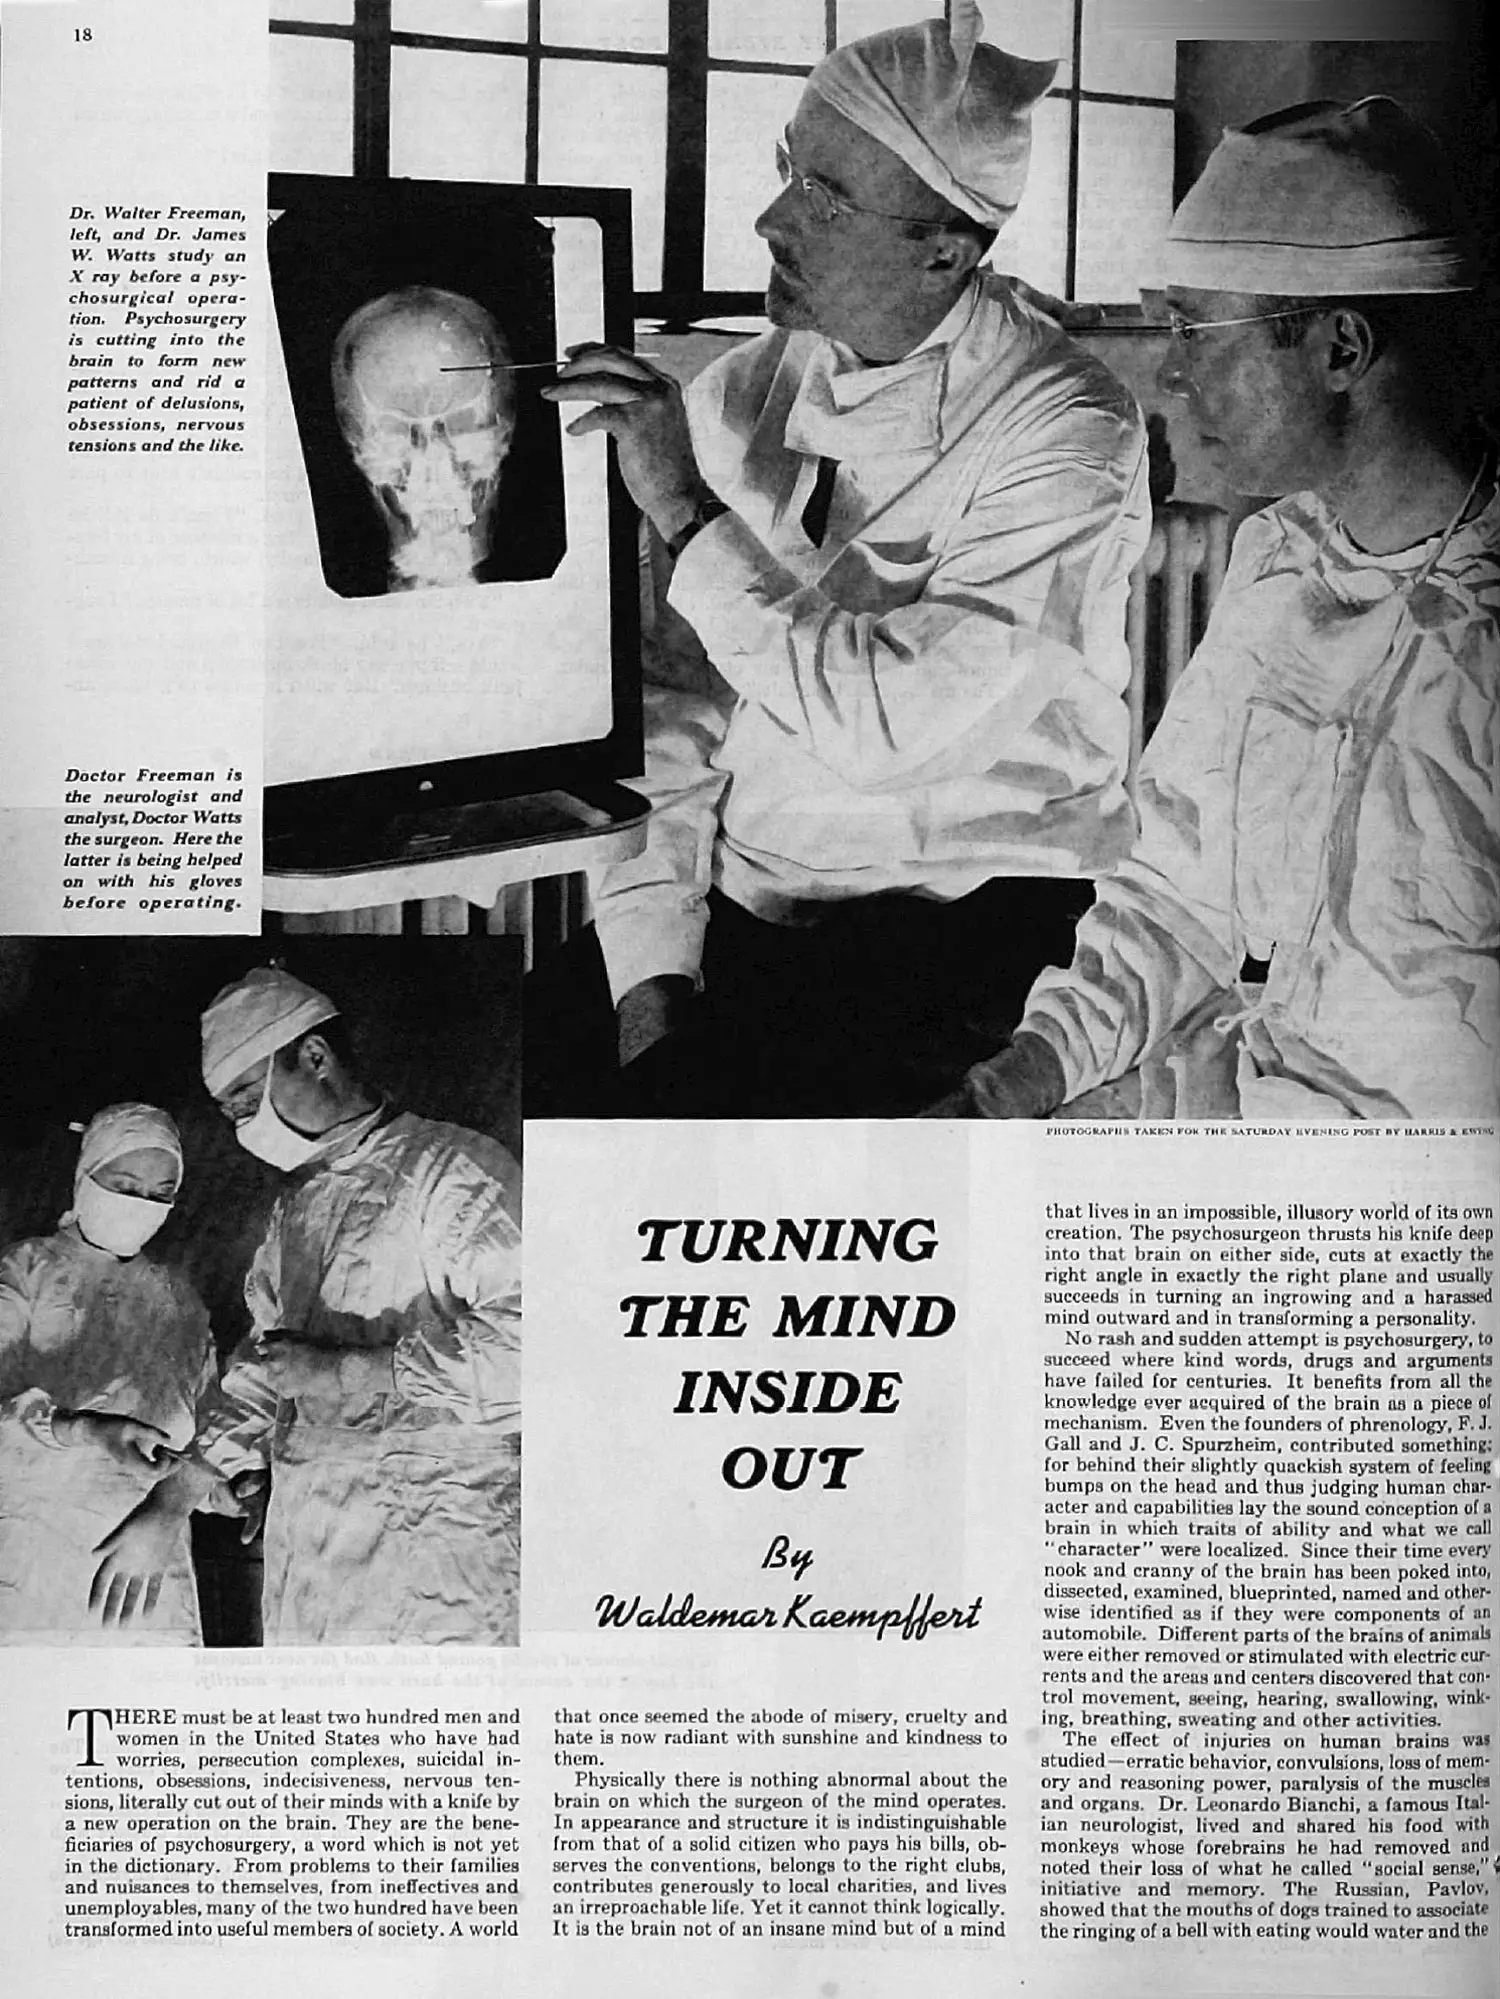 Scan of an article. One image shows surgeons in lab coats looking at an x-ray of a skull and another shows a masked nurse helping a masked surgeon put on gloves before surgery. The text of the article is about “psychosurgery.”